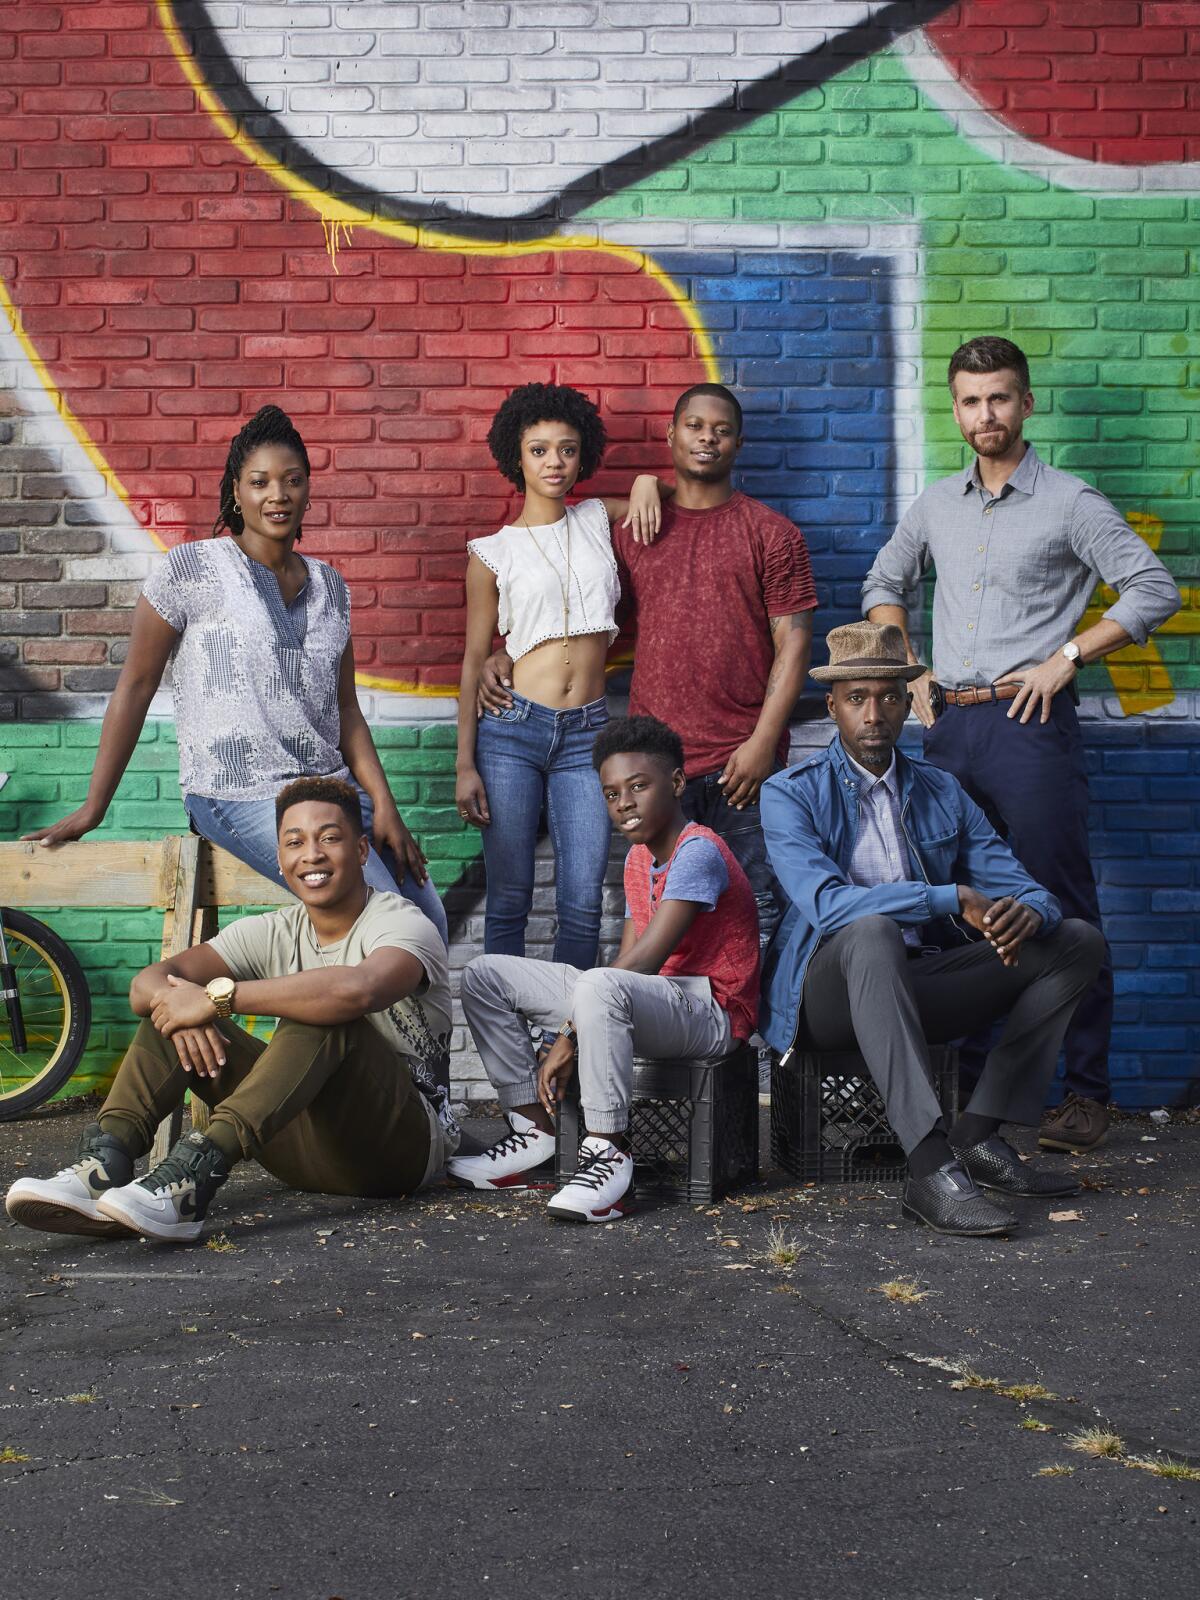 The cast of Showtime's "The Chi," which premiered this month and has already garnered critical acclaim.